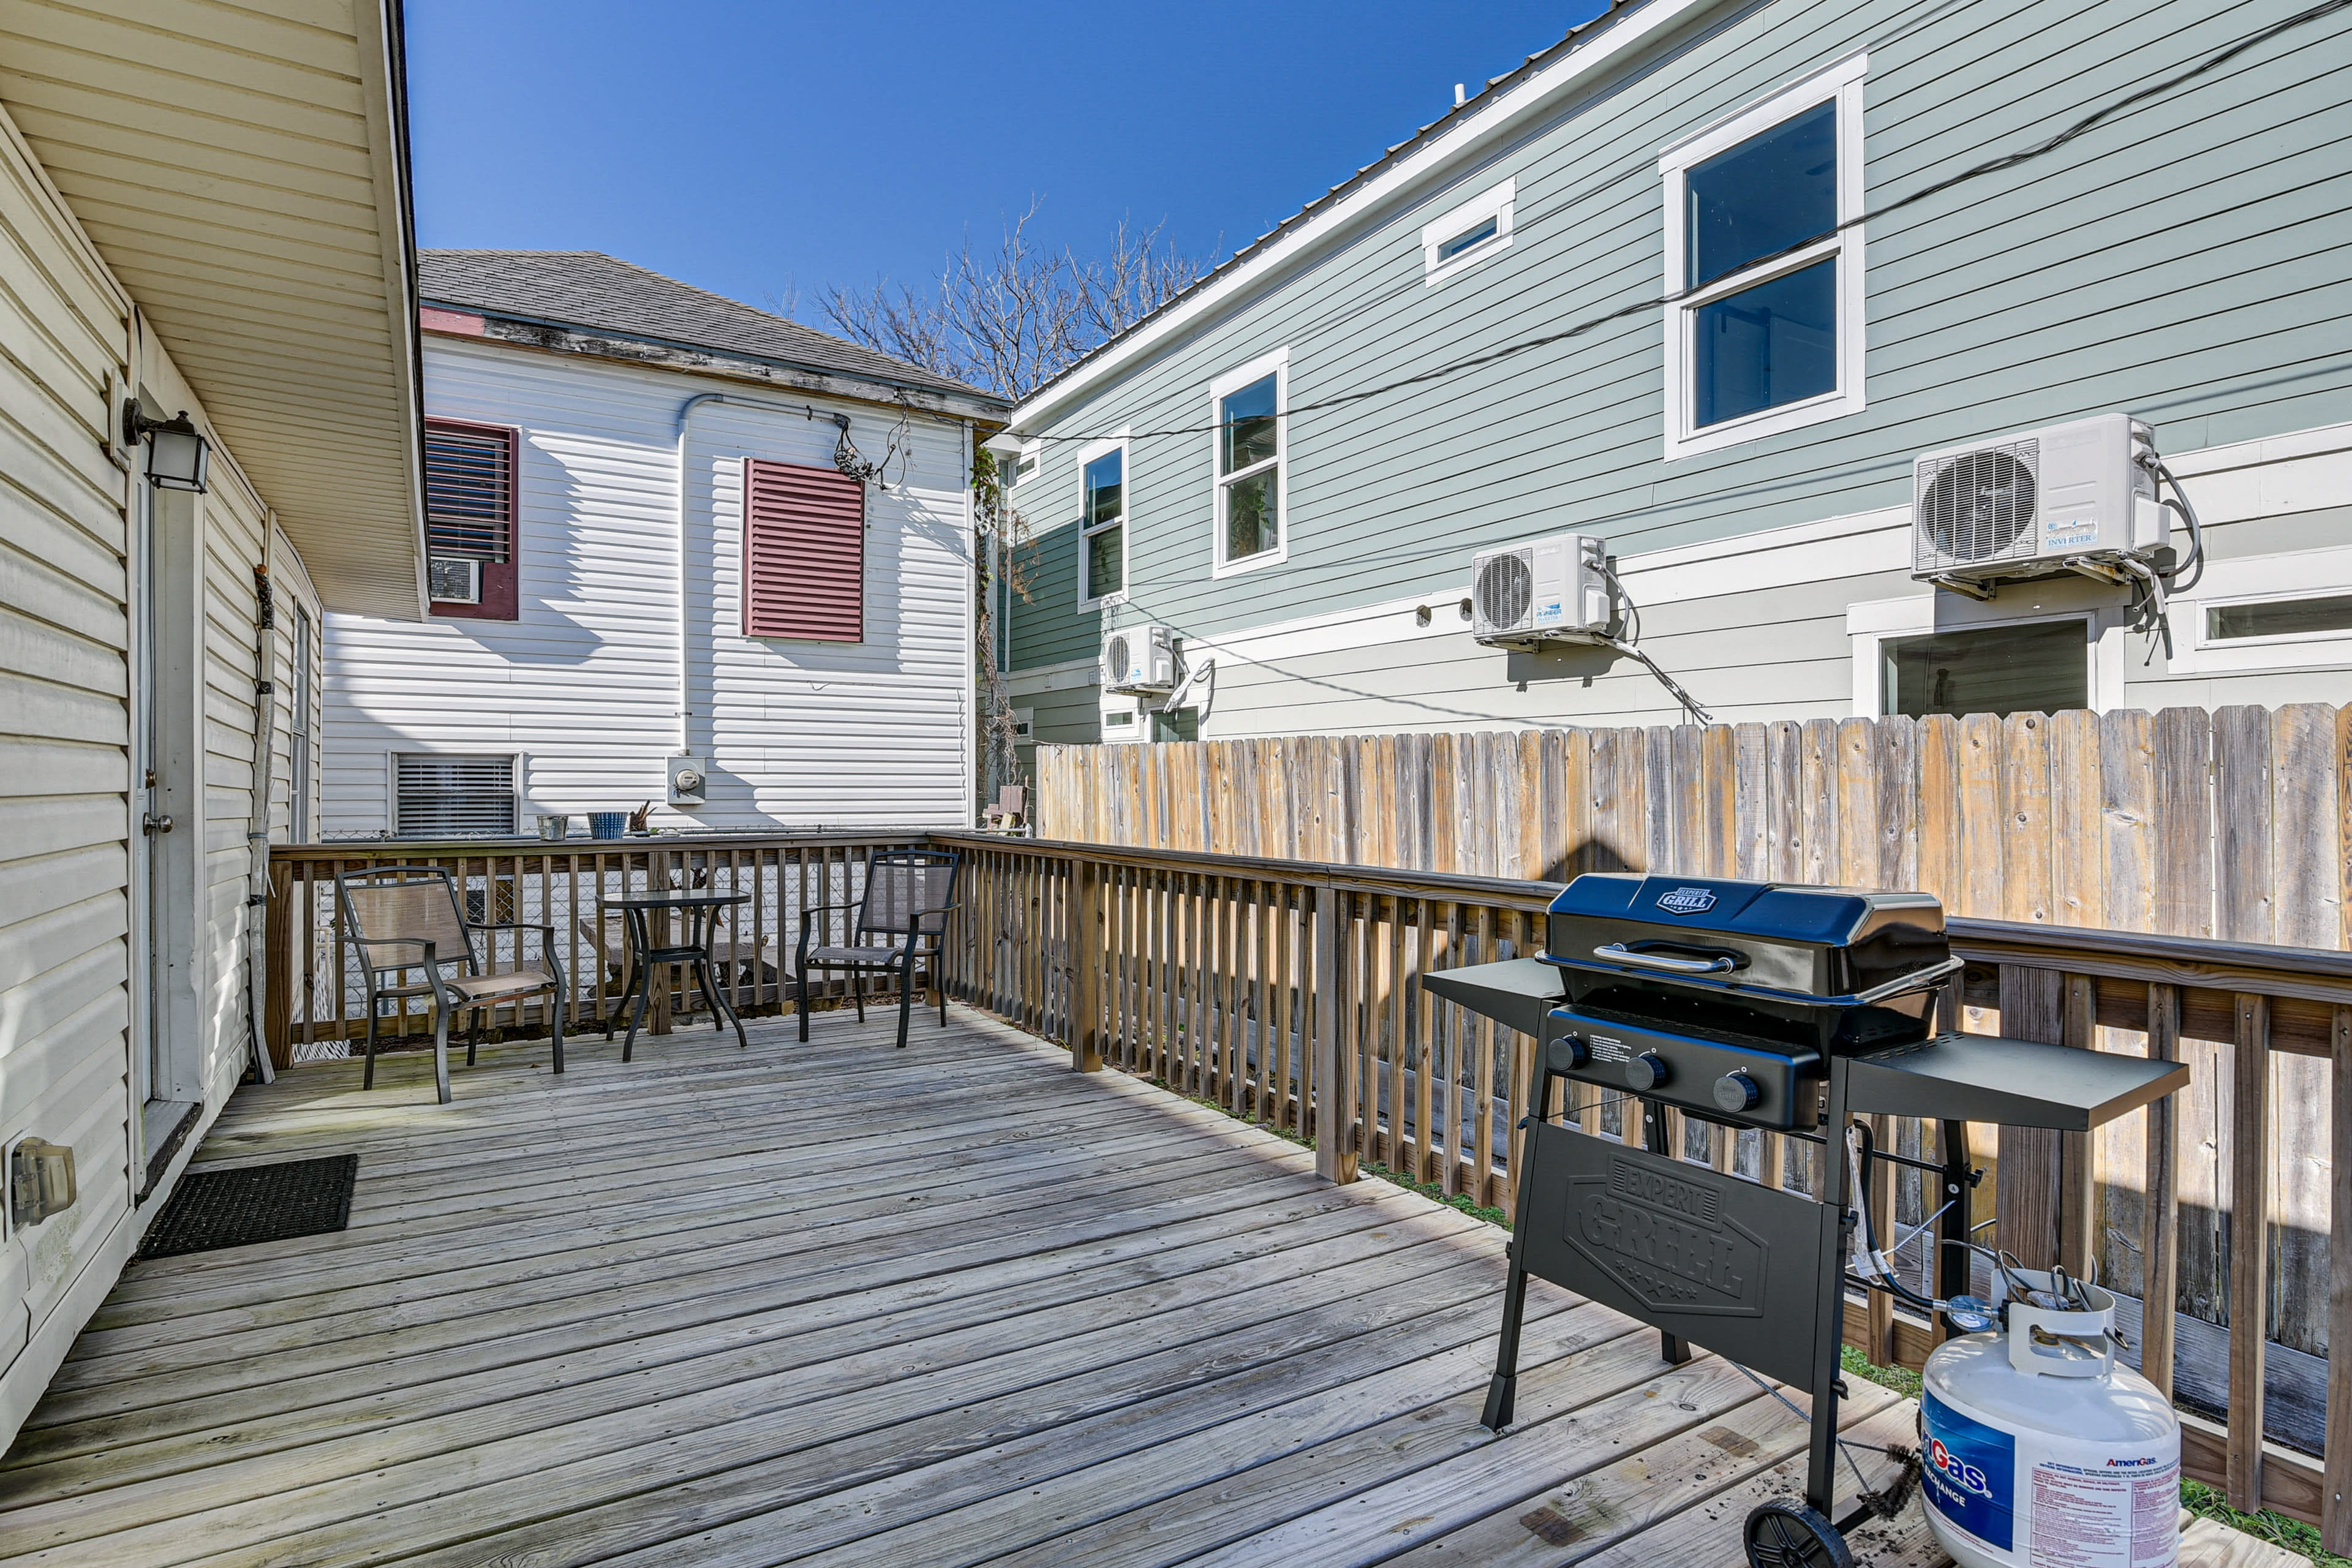 Outdoor Entertainment Area | Deck | Gas Grill | Dining Area